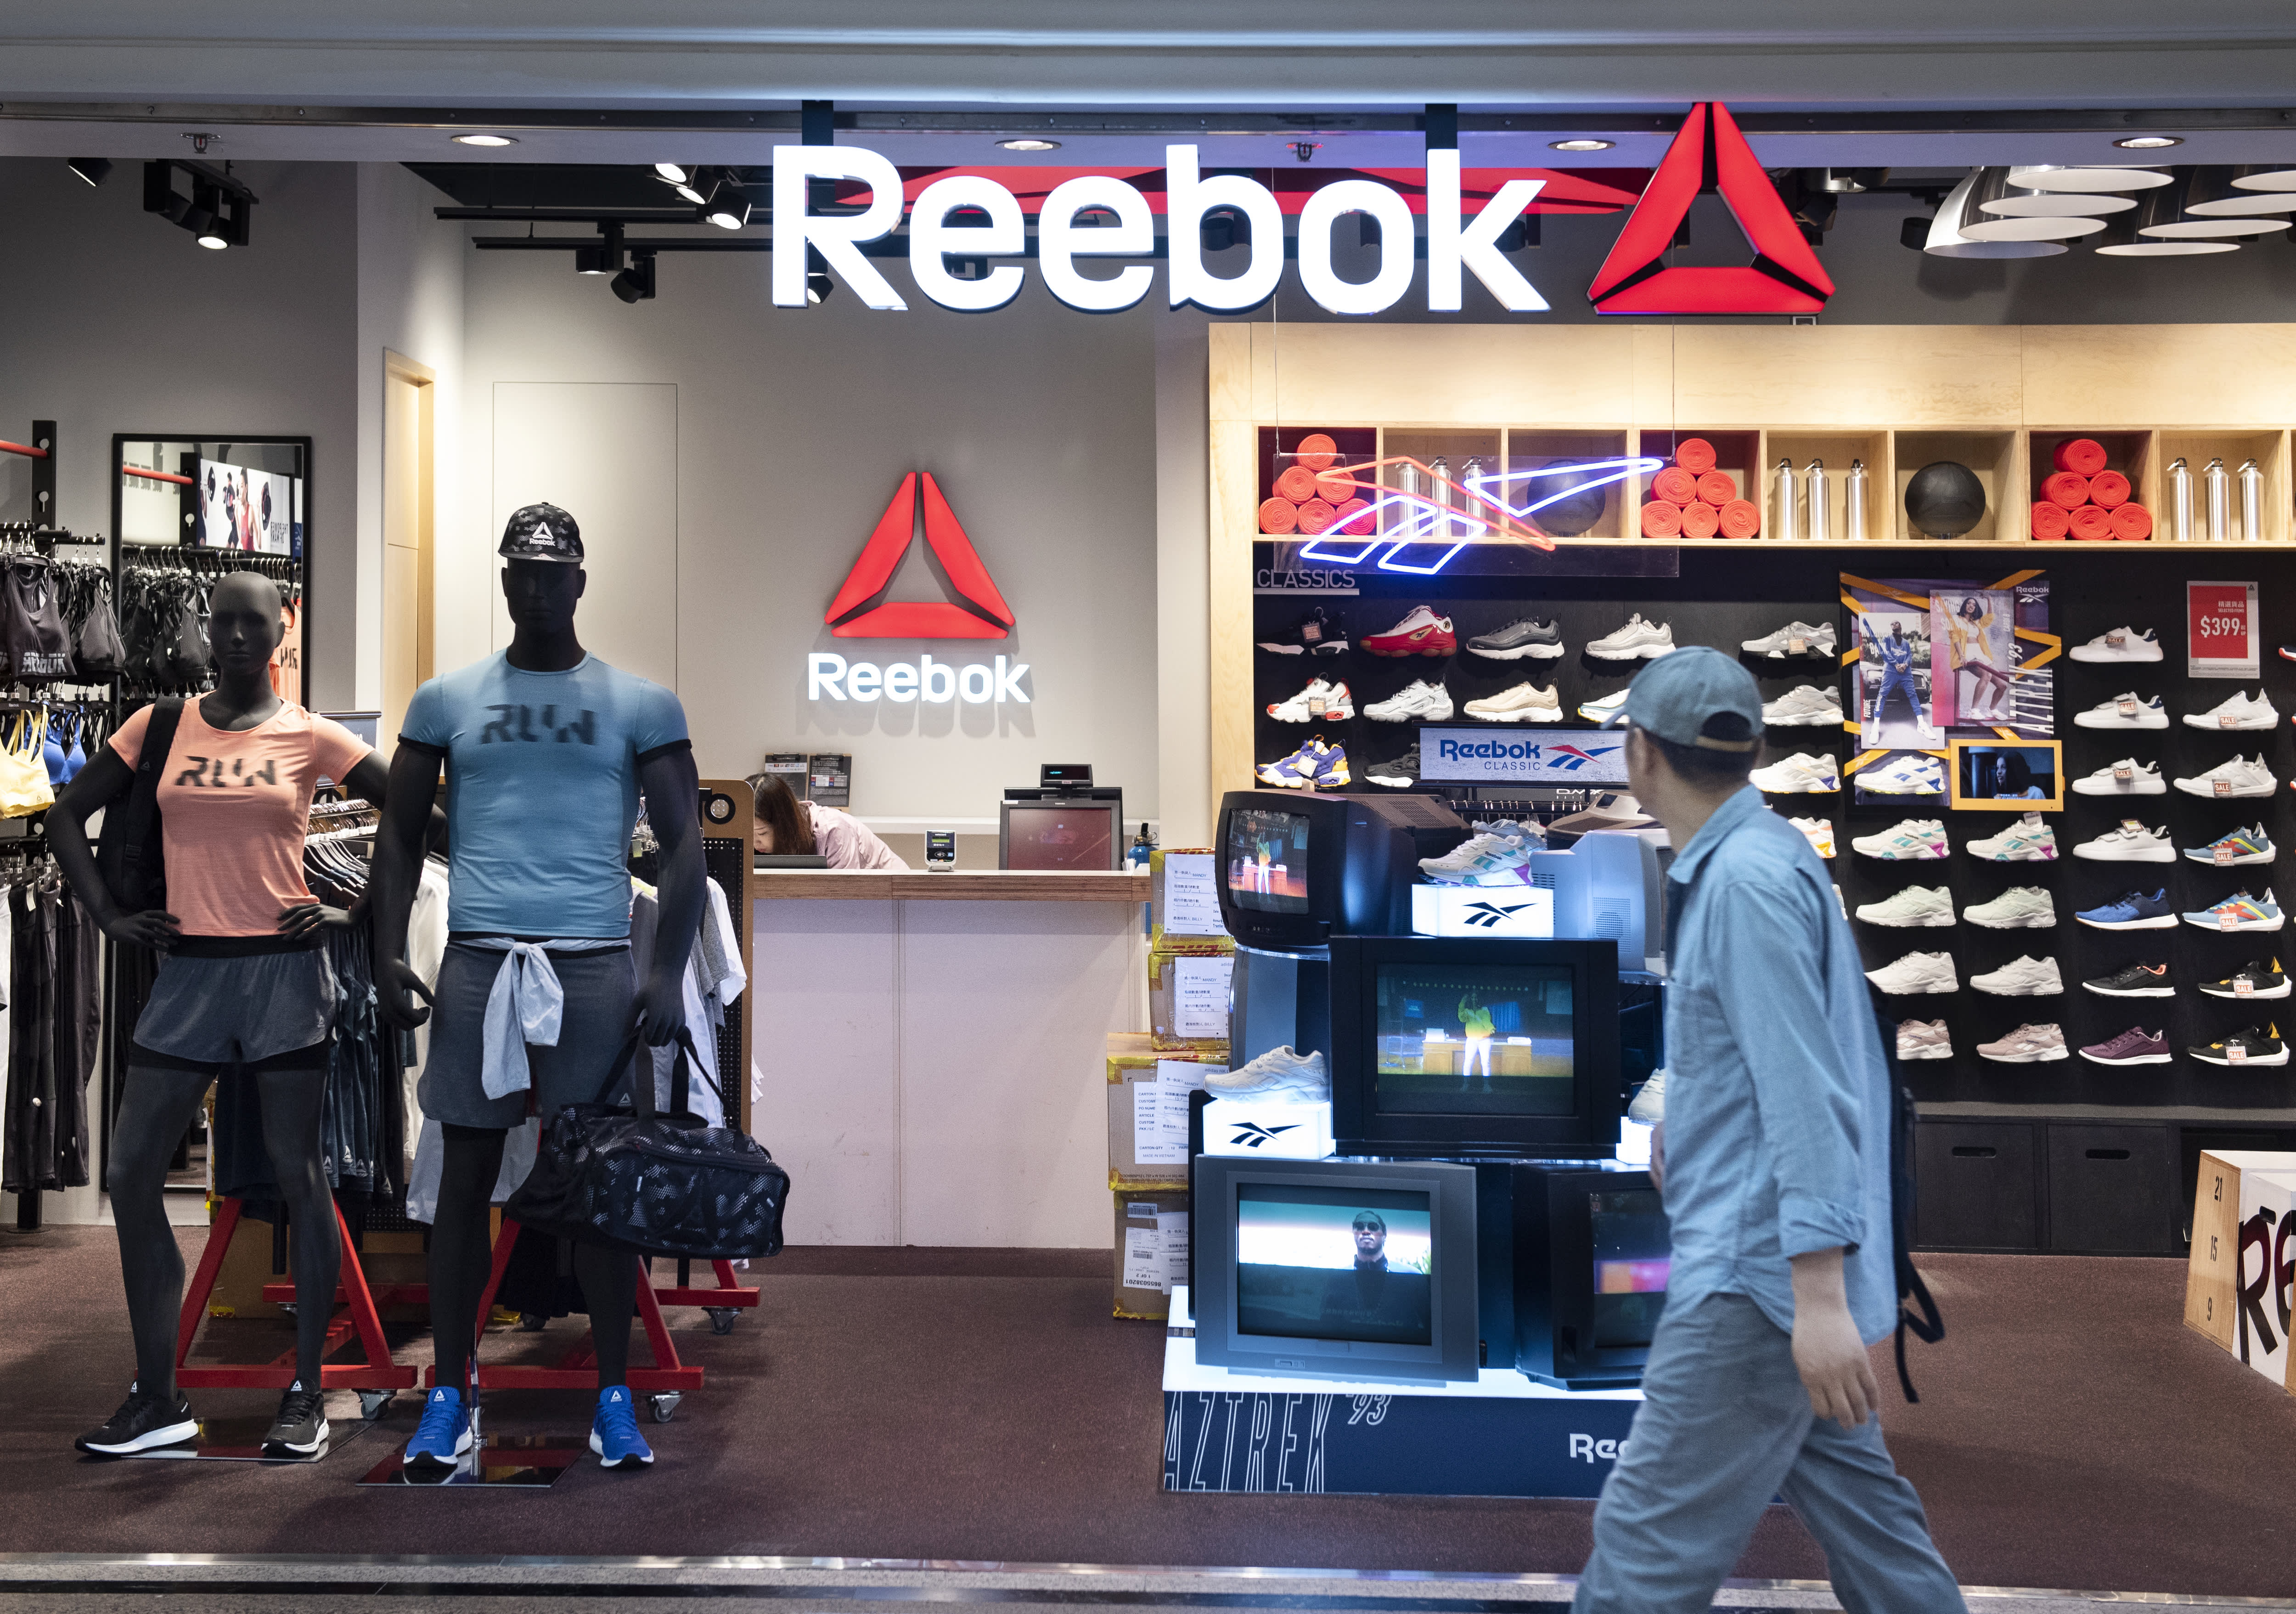 Is There a Reebok Store Near Me?